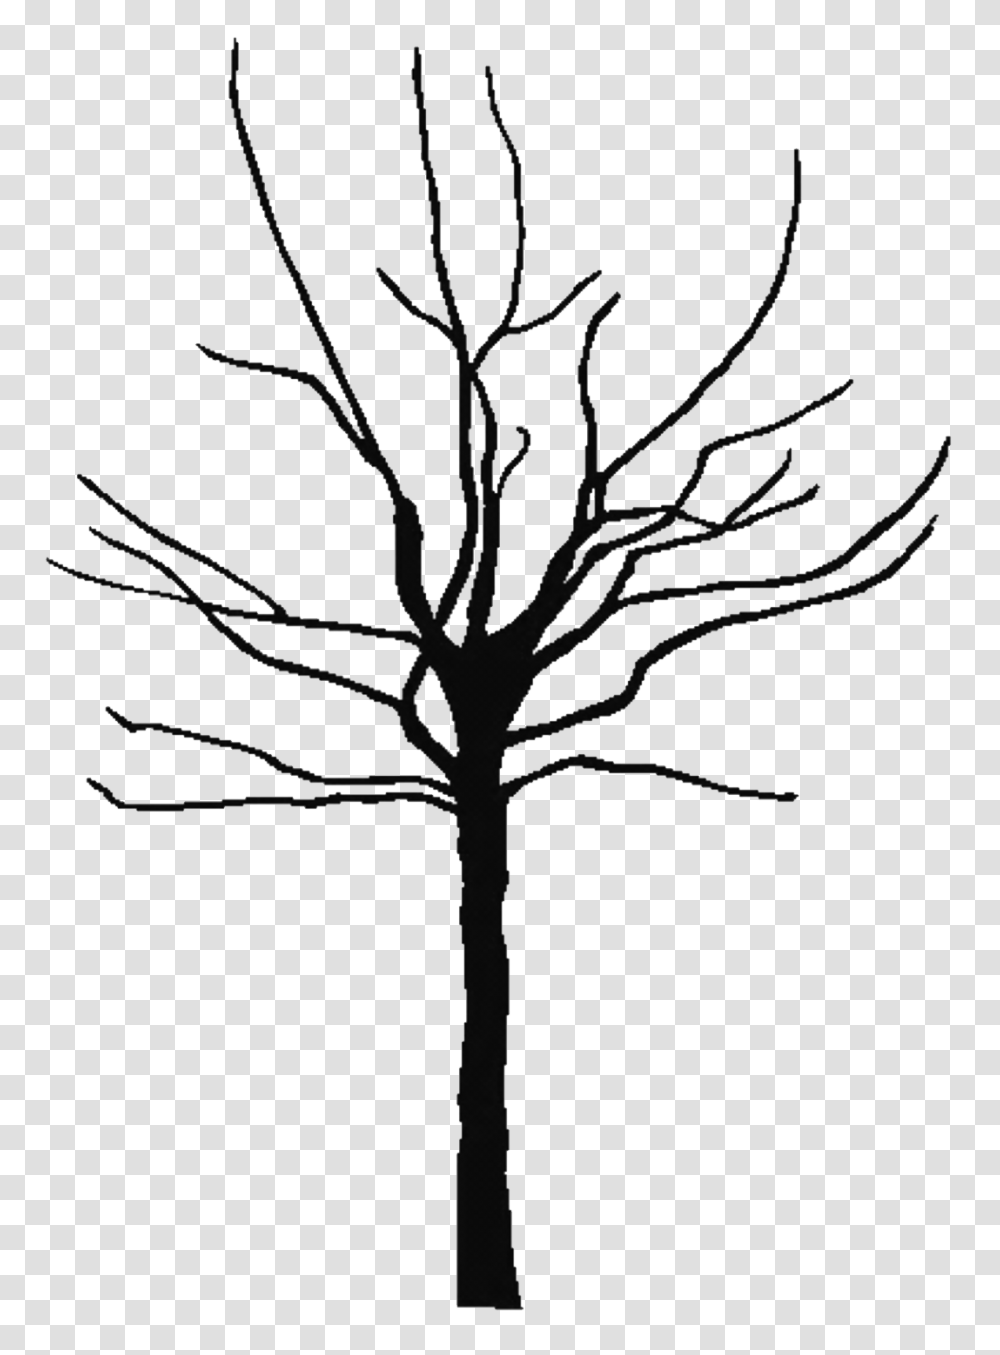 Majestic Roots Silhouette Tree Roots Silhouette Image, Plant, Tree Trunk, Oak, Sycamore Transparent Png